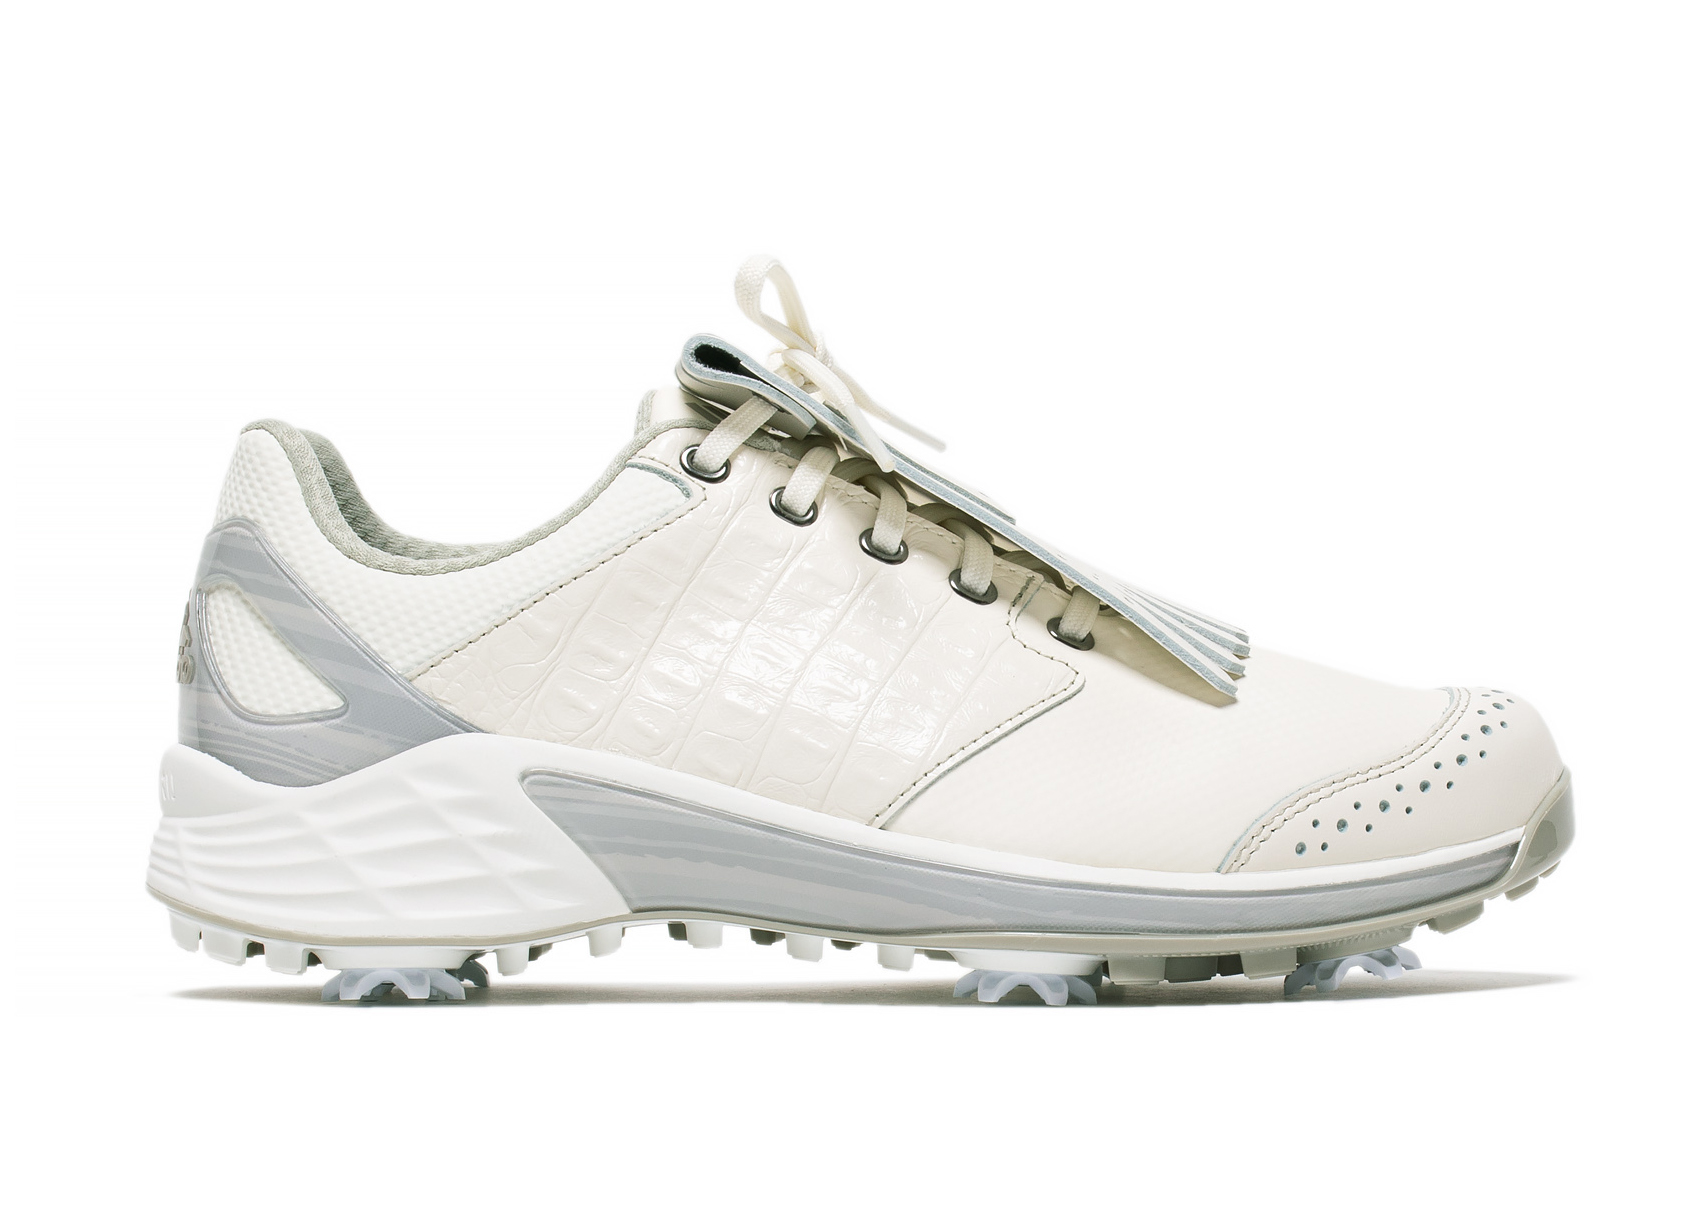 adidas ZG21 Spiked Golf Extra Butter Chubbs Happy Gilmore Men's